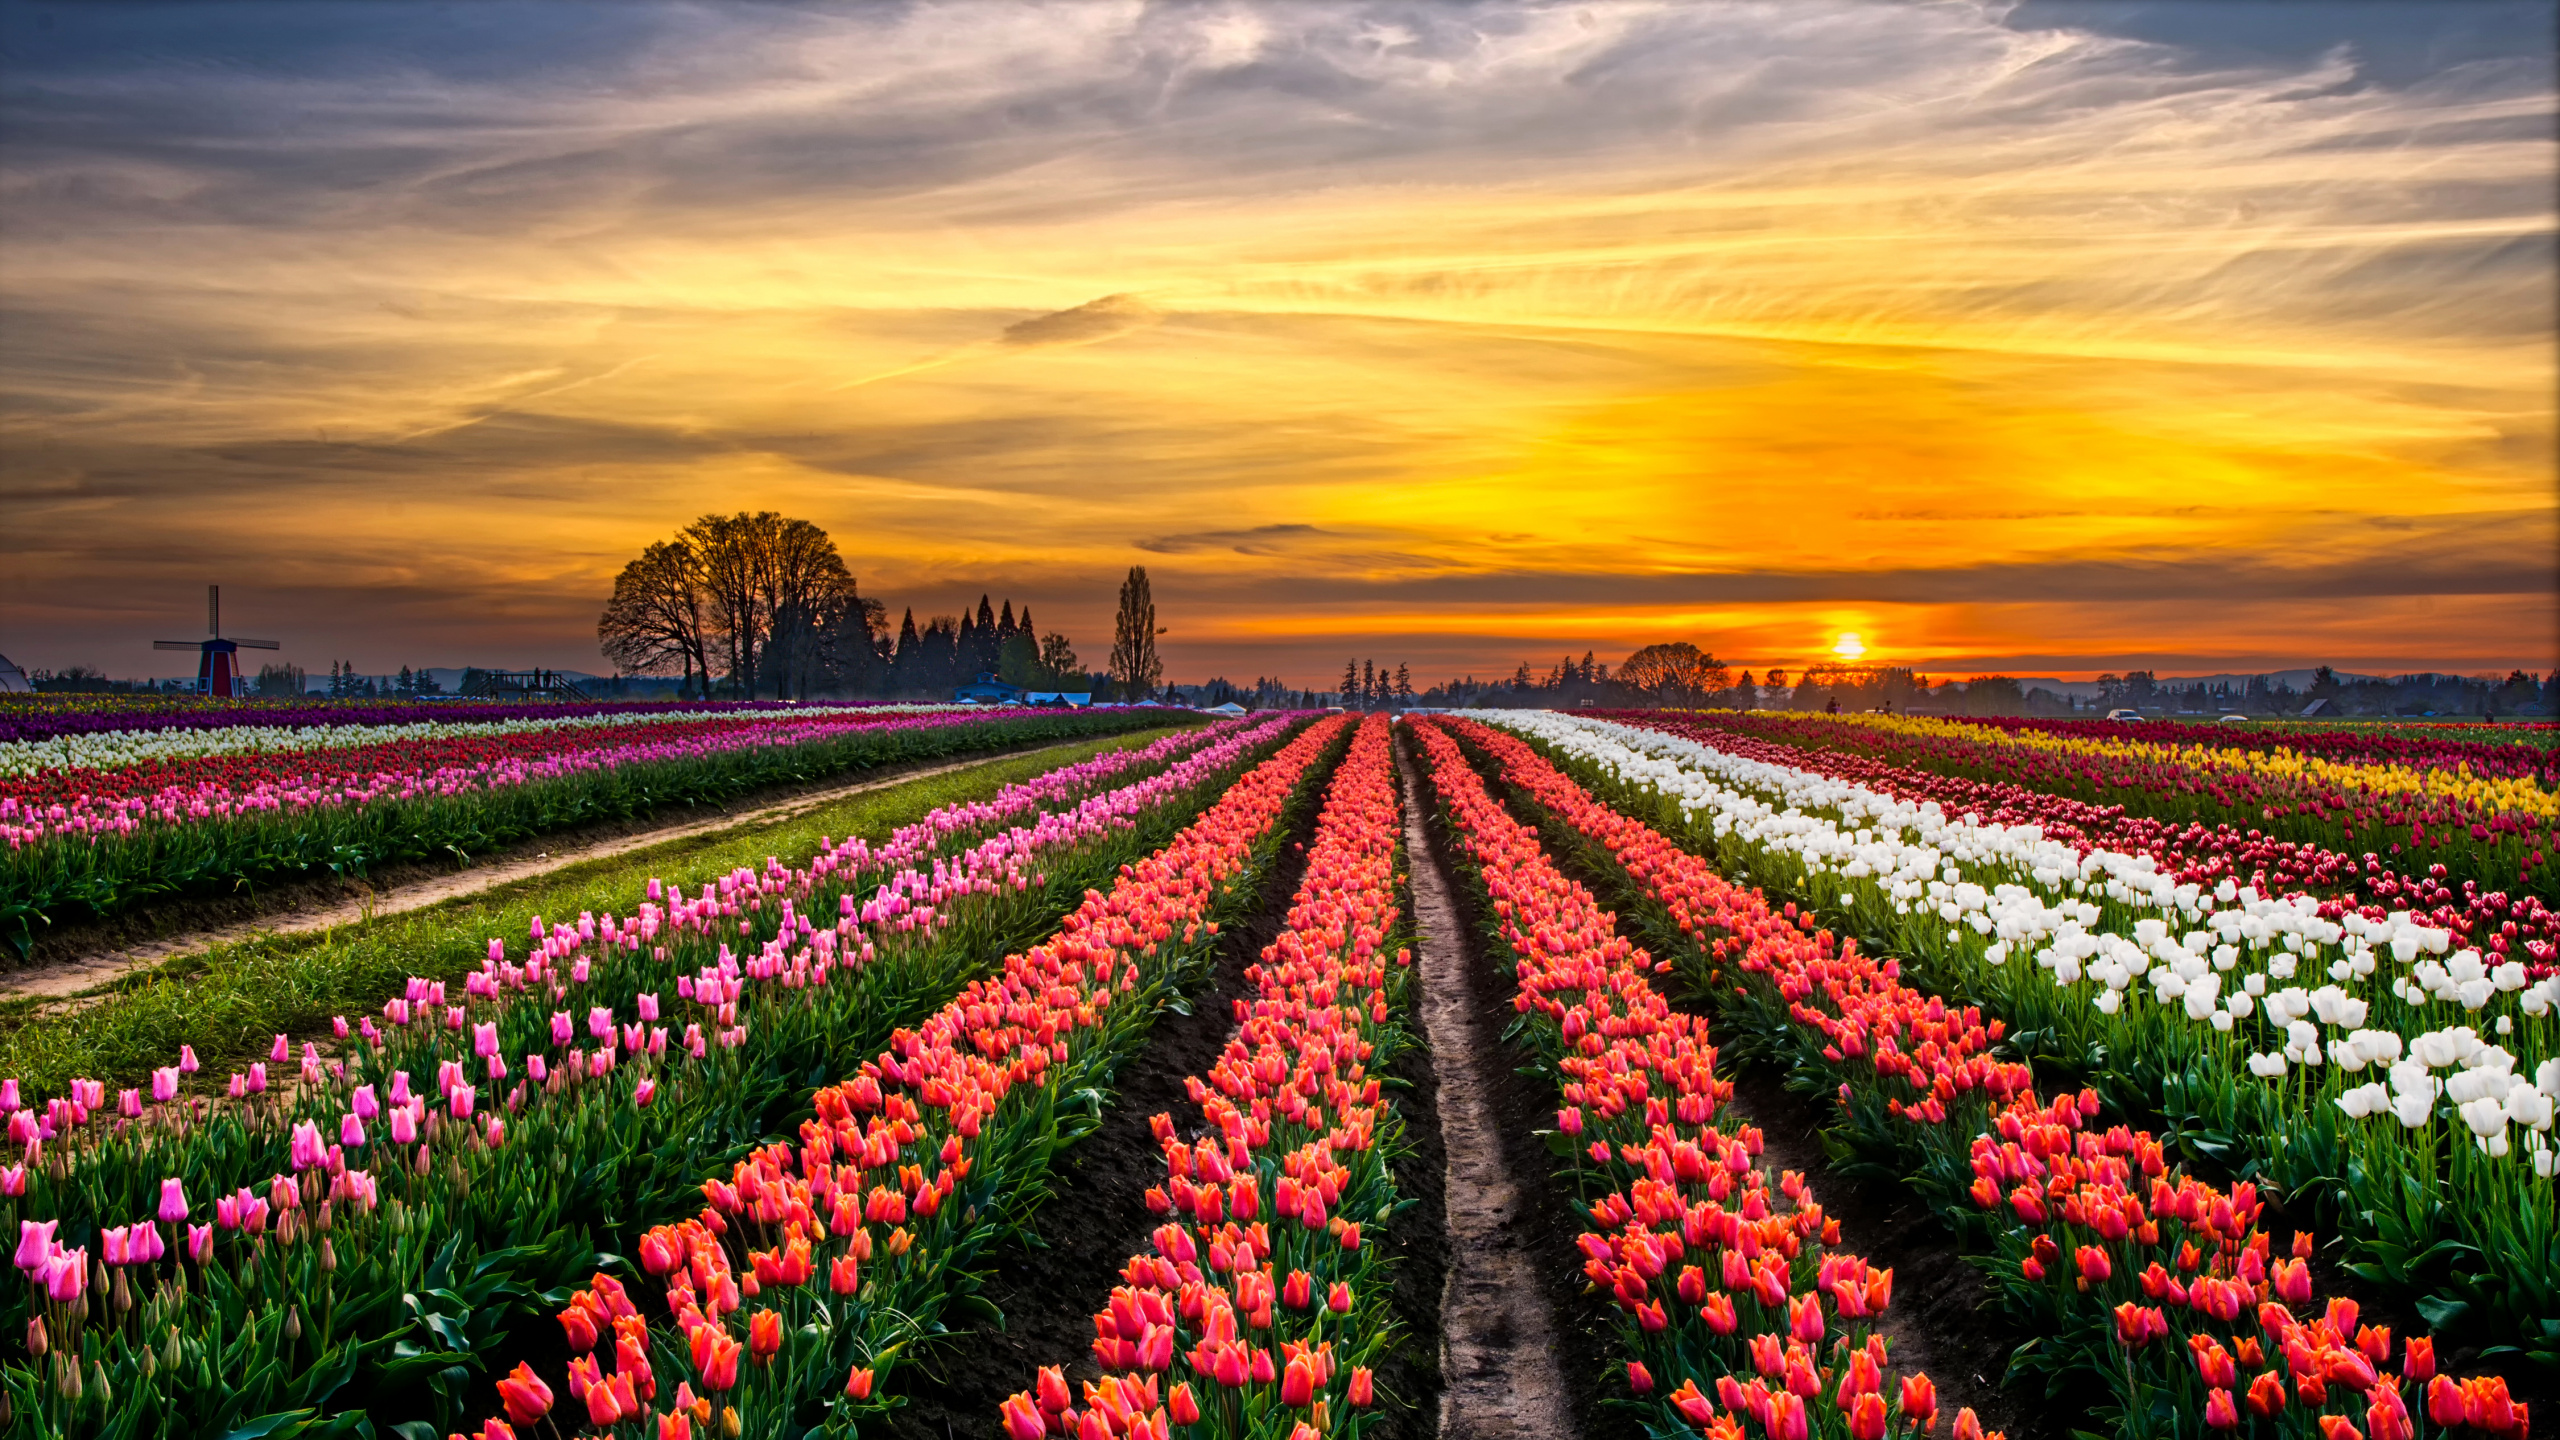 Pink and White Flower Field During Sunset. Wallpaper in 2560x1440 Resolution